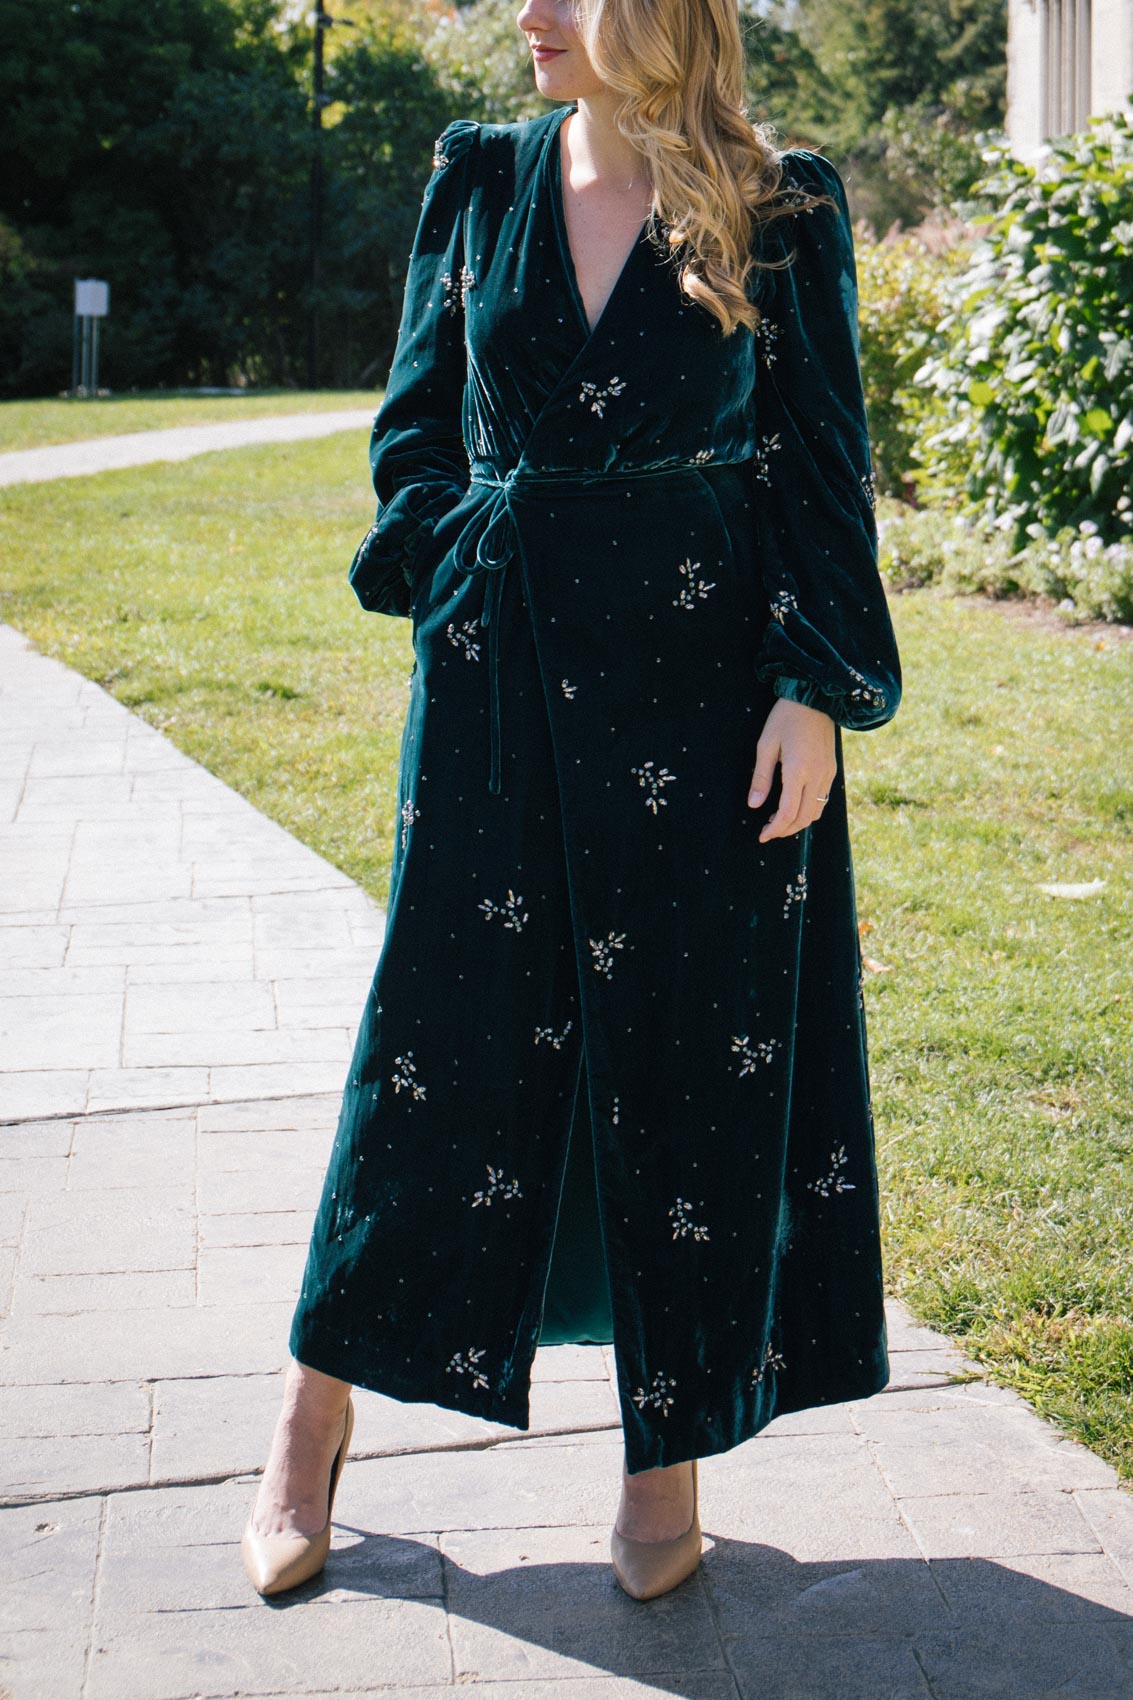 Green velvet dress outfit styled by Allyn Lewis for holiday outfit inspiration #winter2020